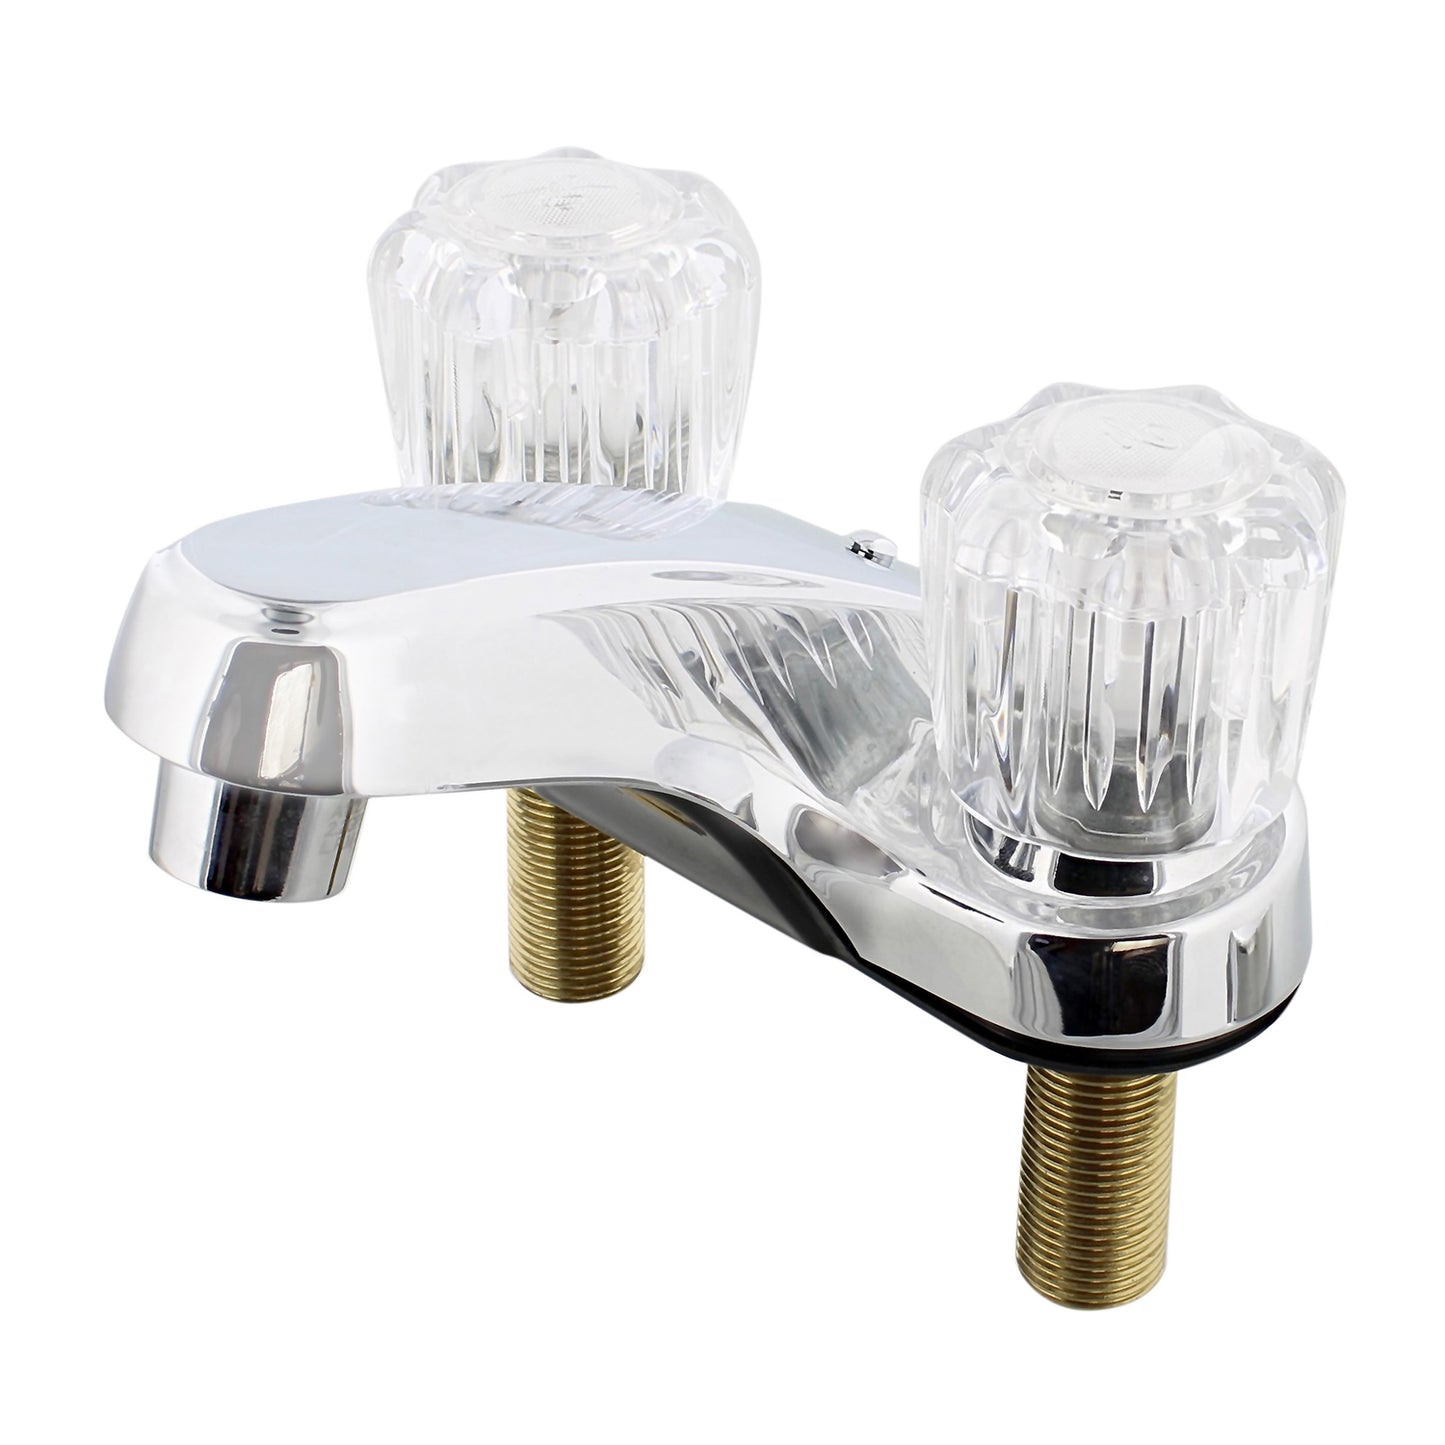 Lavatory Faucet - 4IN Chrome Bathroom Faucet with Crystal Handles